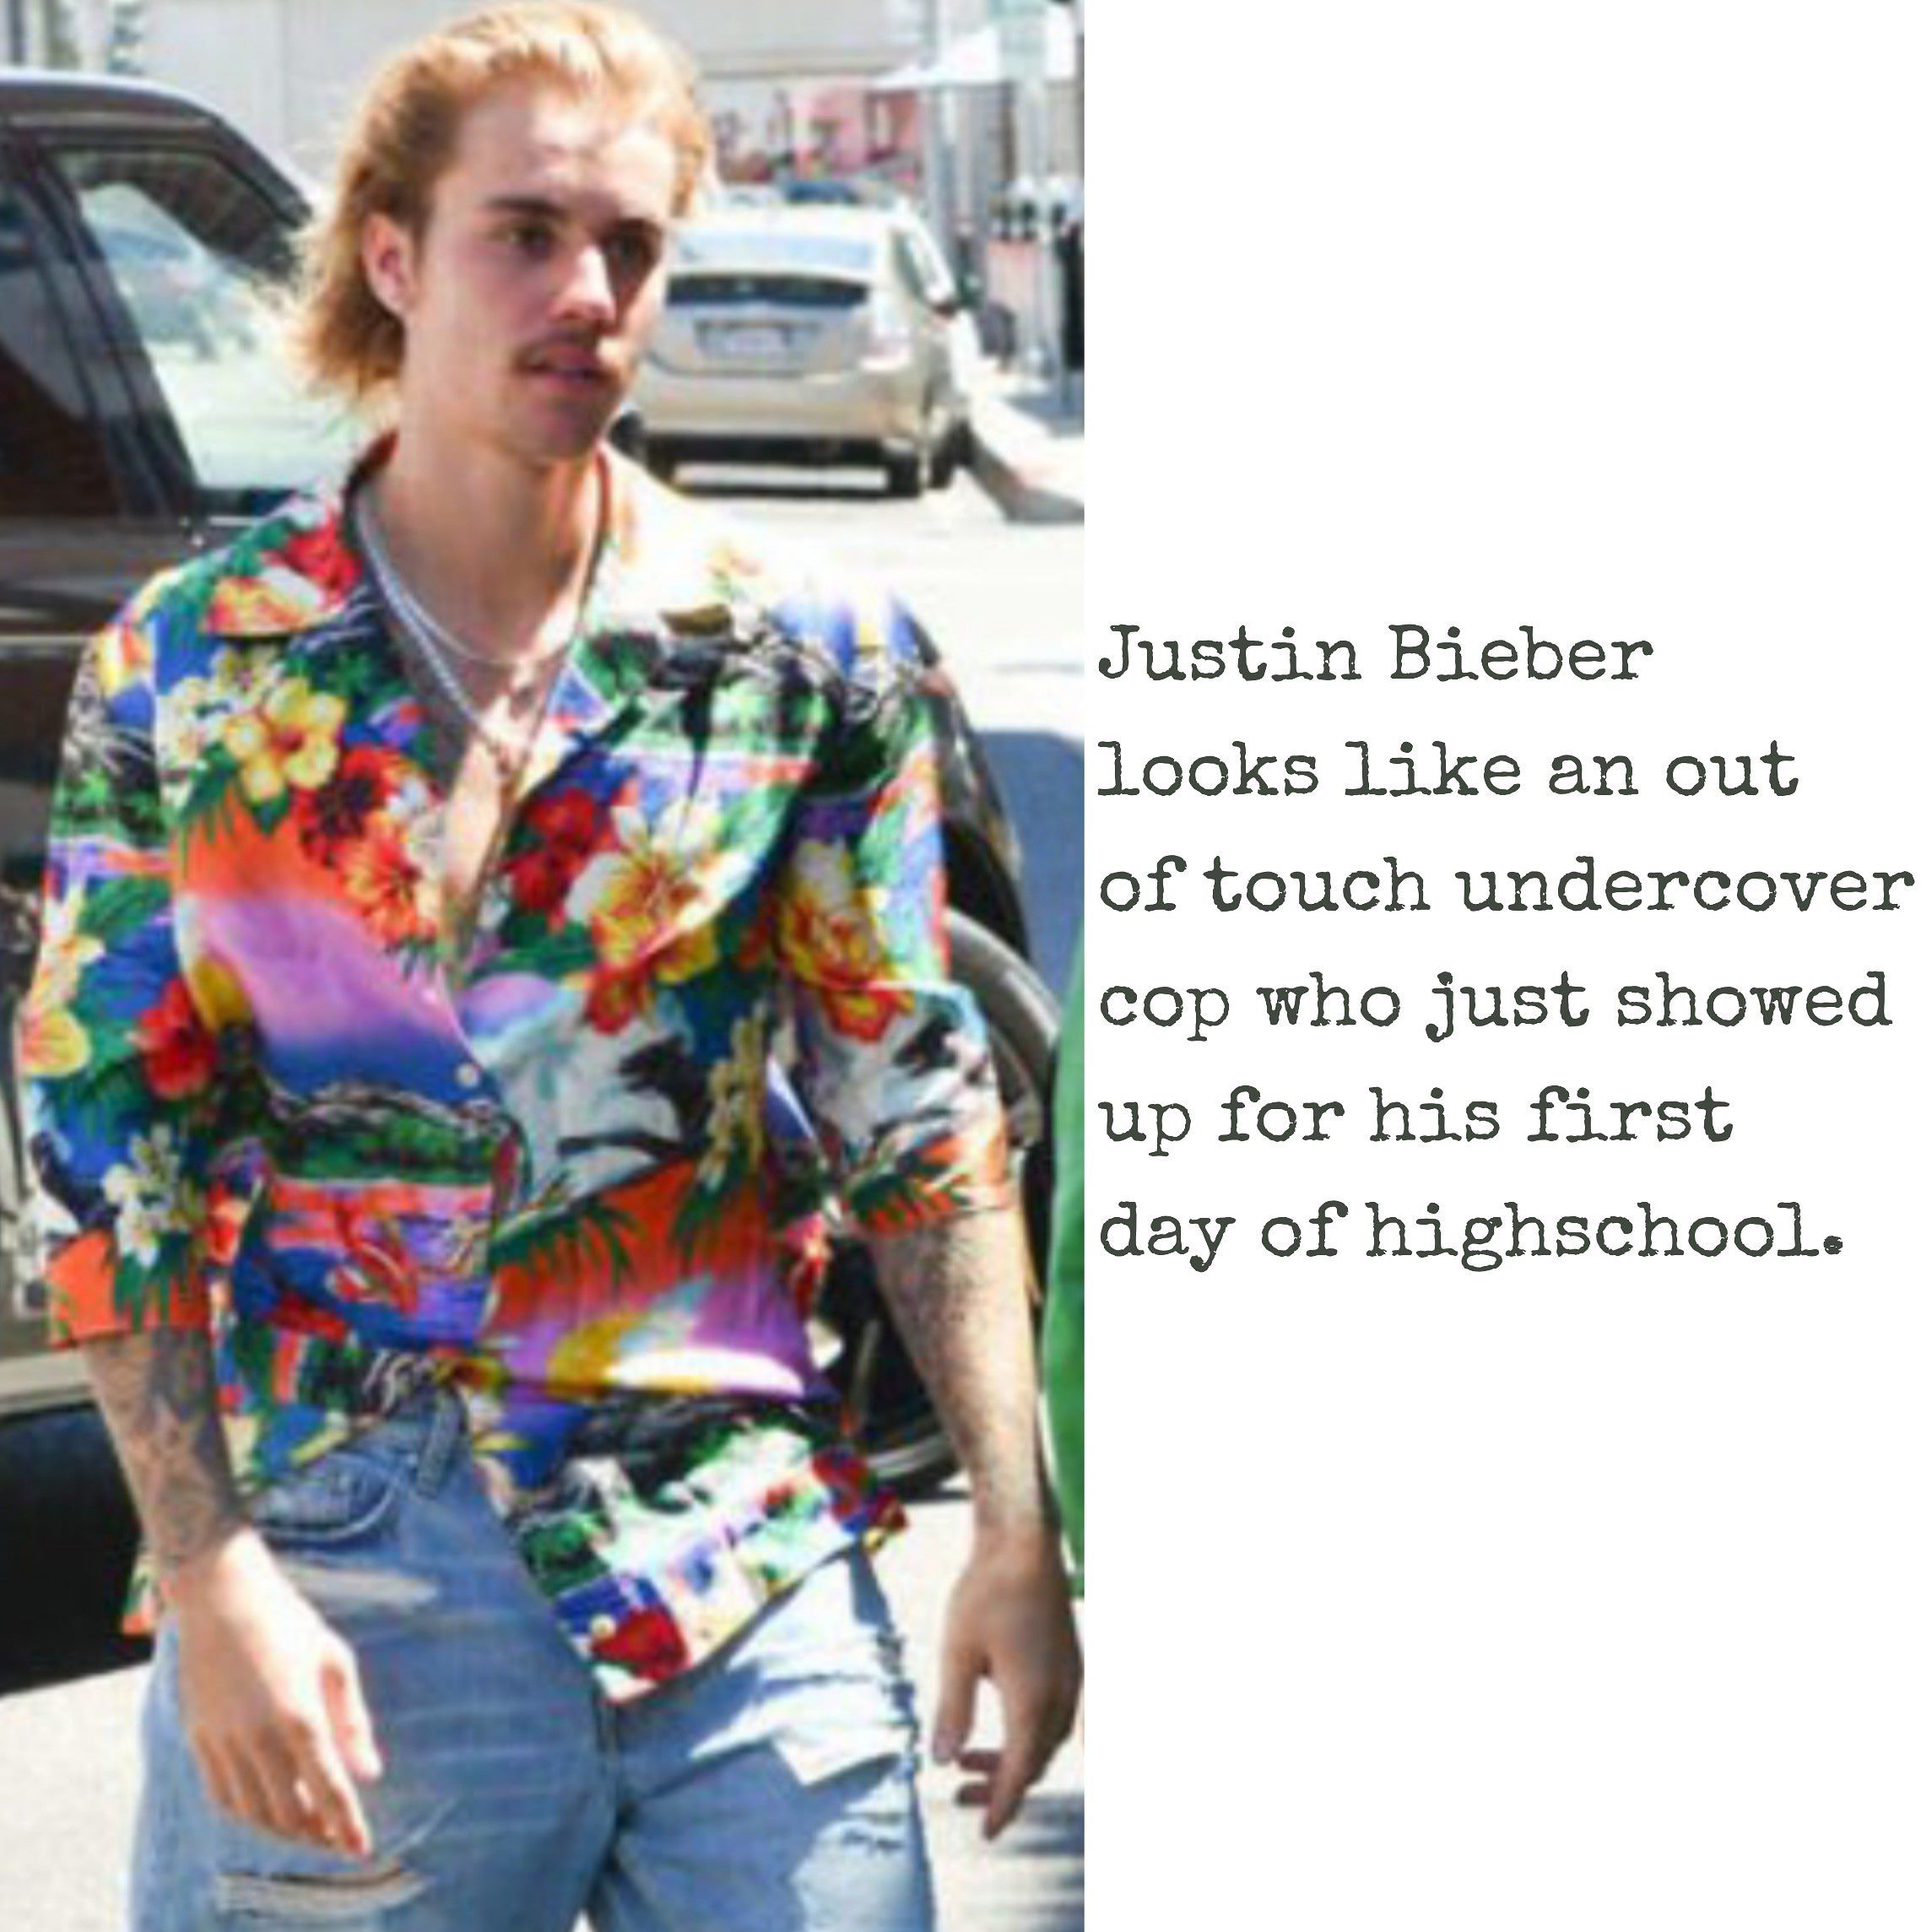 Justin Bieber looks like a criminal sketch on an old episode of unsolved mysteries.